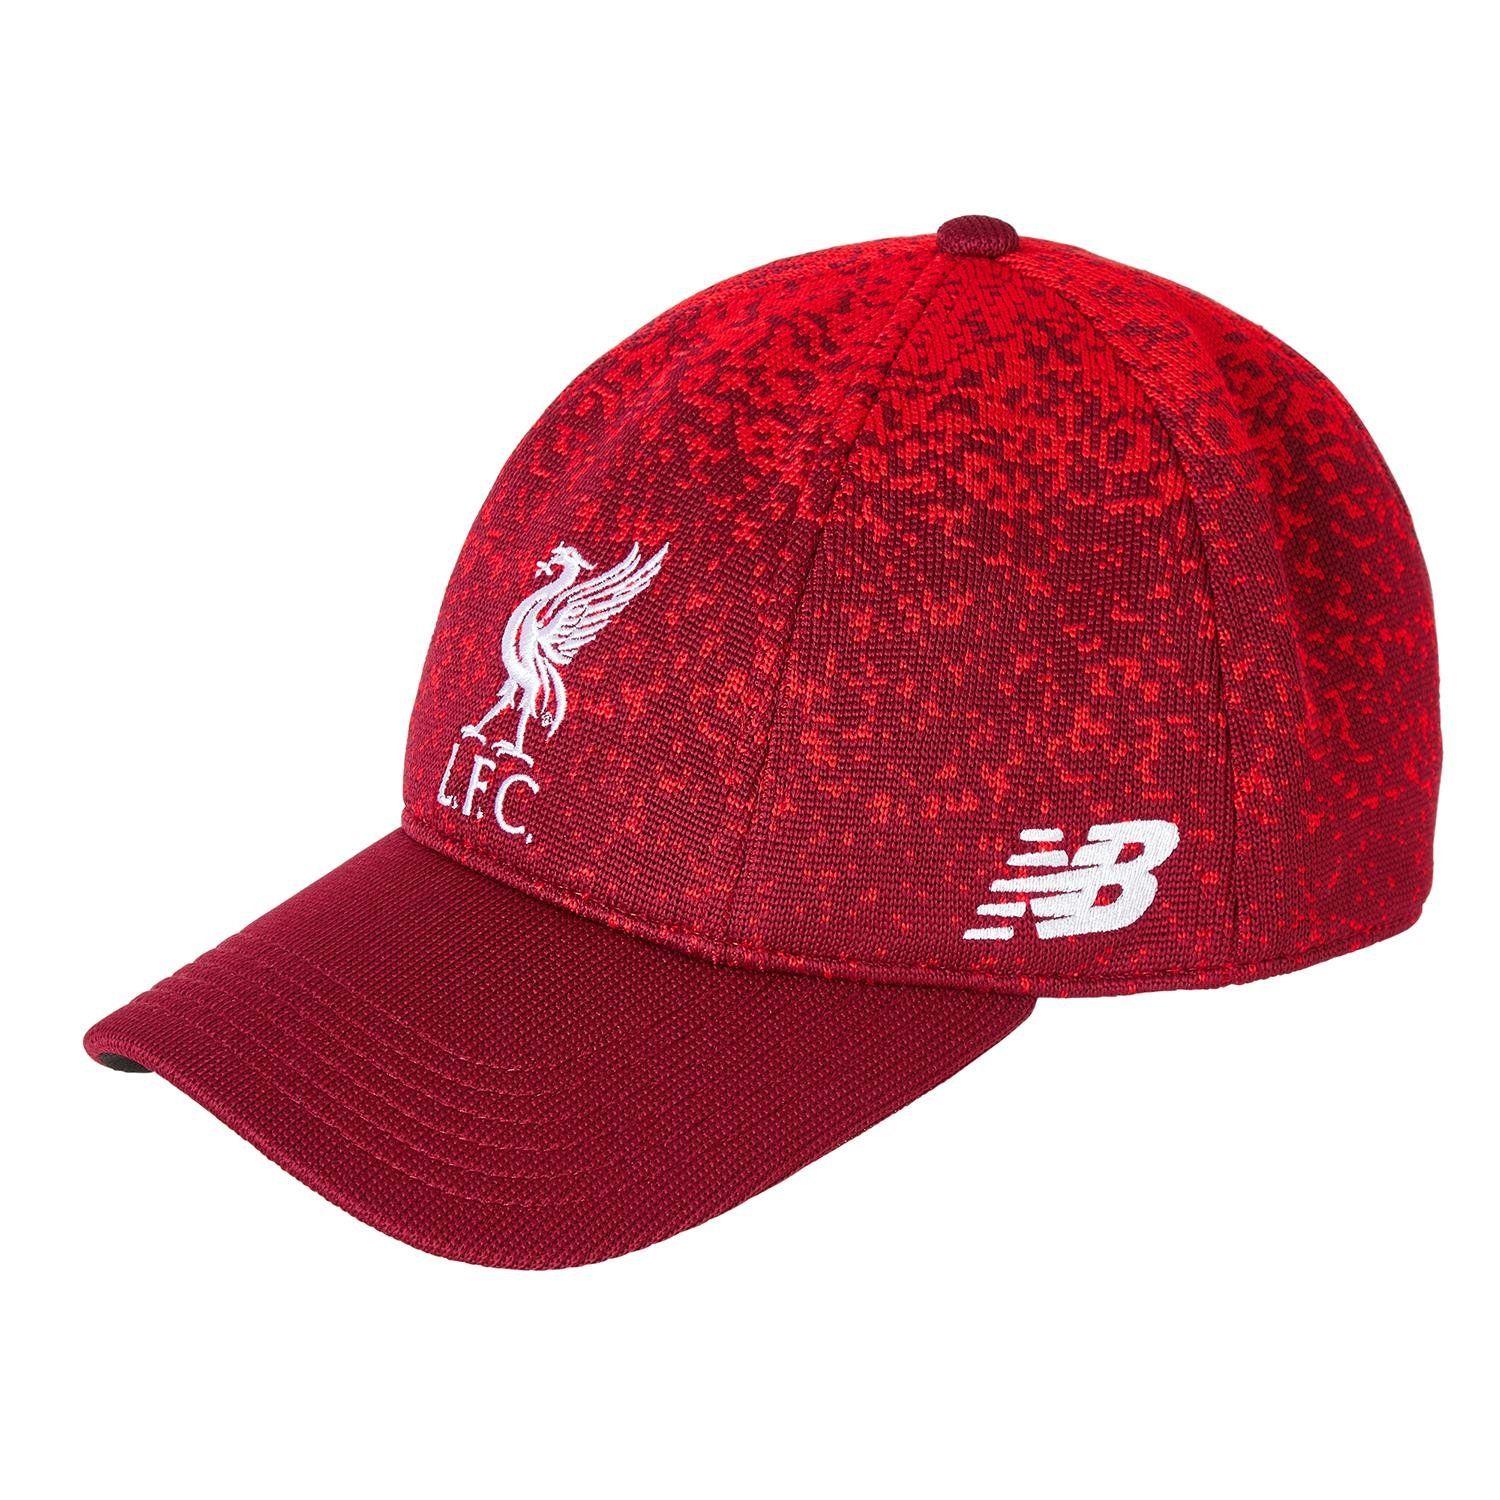 Red NB Logo - New Balance Liverpool FC Marl Red NB Klopp Cap LFC Official Store